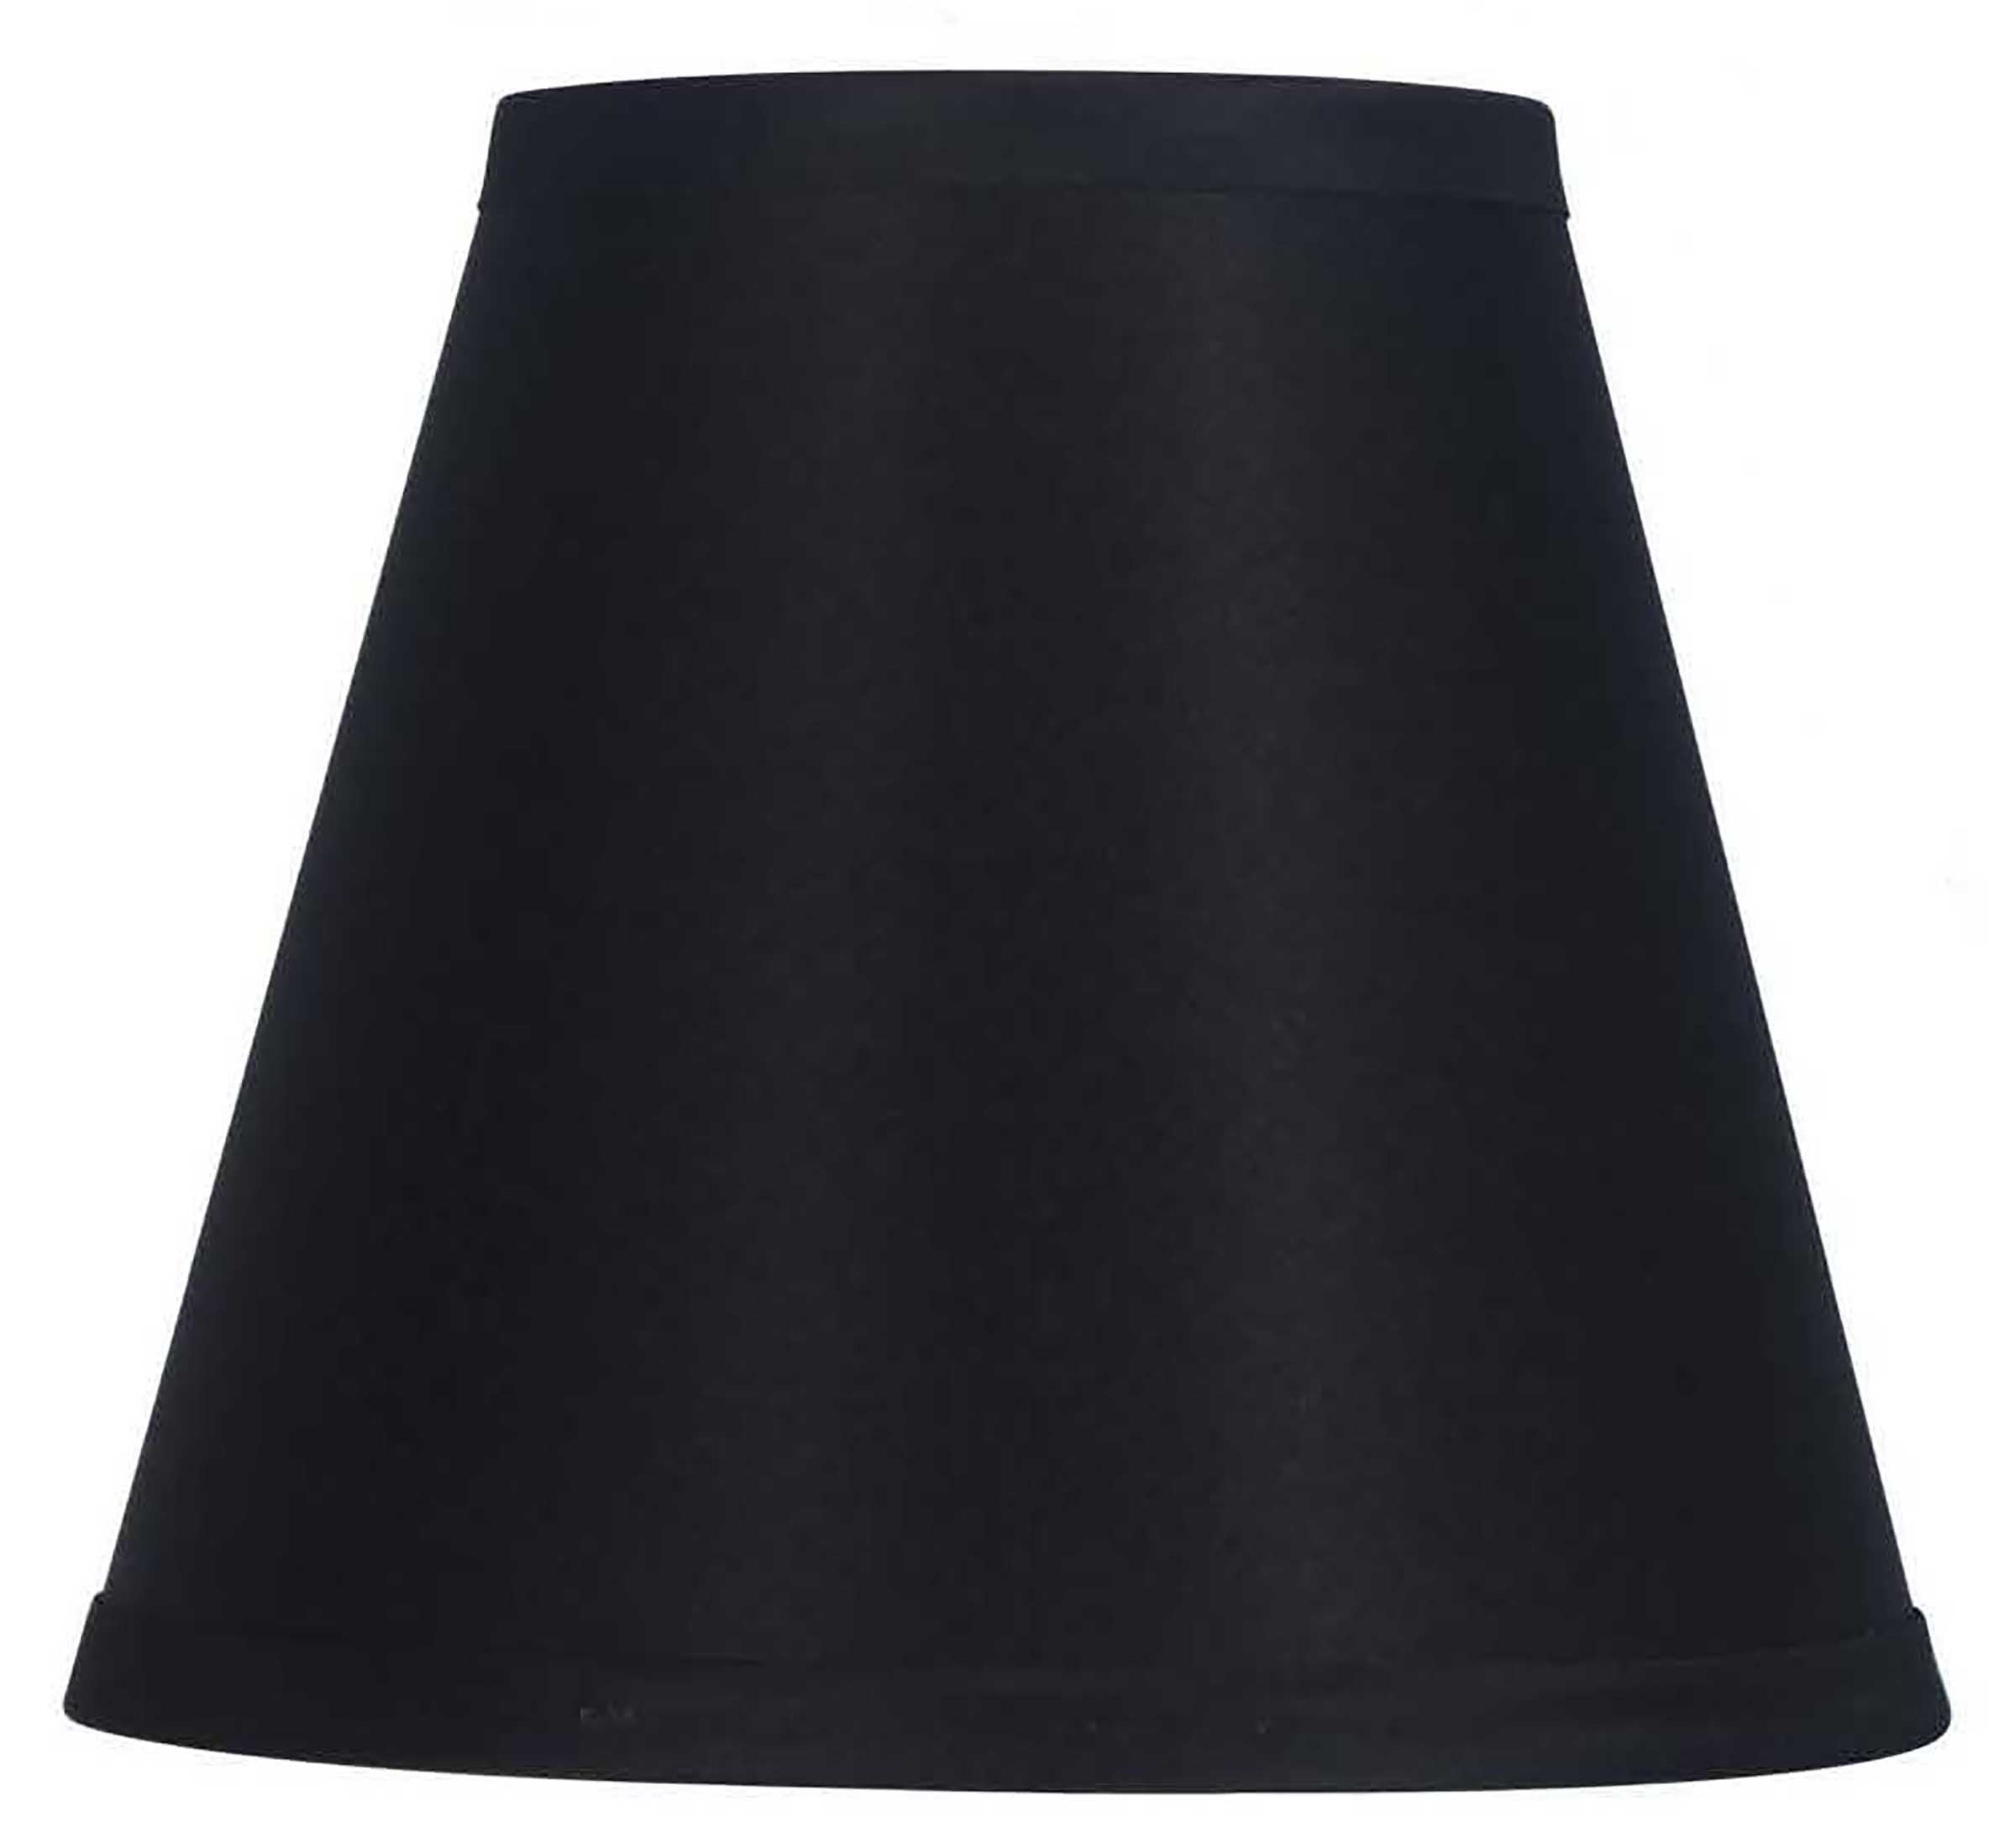 Mainstays Empire Accent Lamp Shade in Solid Black 7"